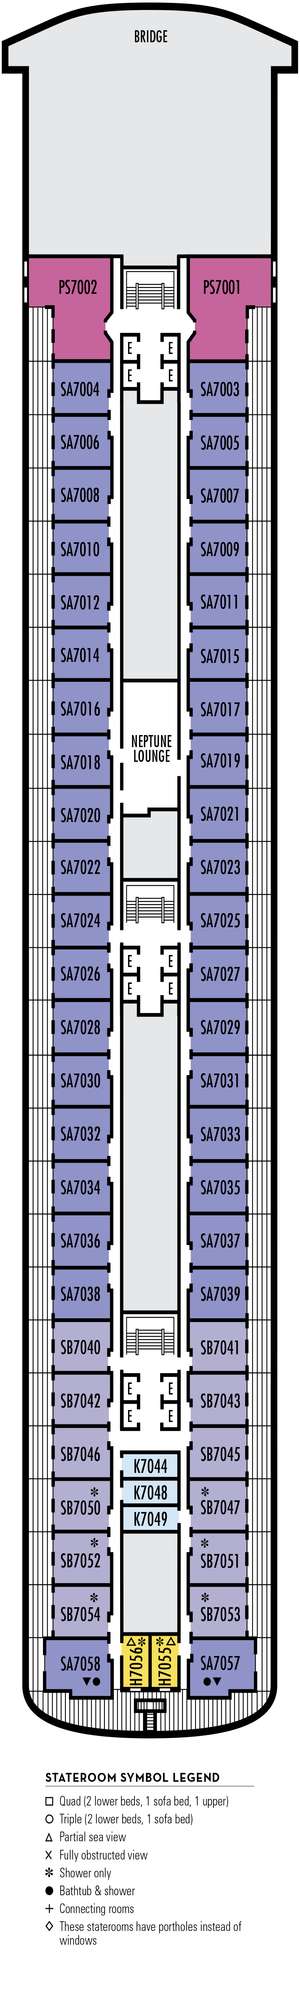 Deck plan for ms Amsterdam